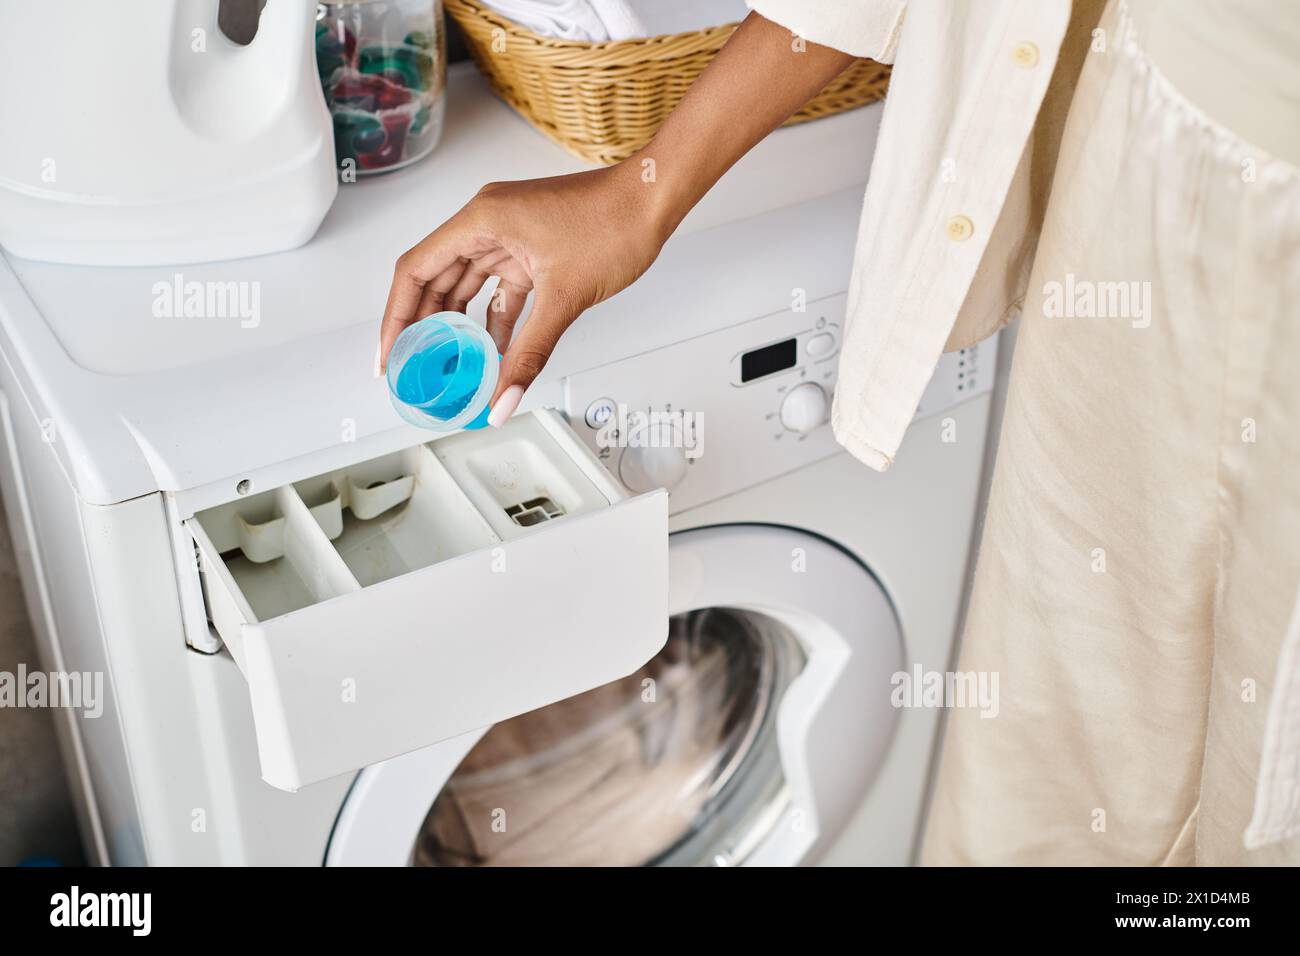 African-American woman cleans a washing machine in a bathroom as part of her housework routine. Stock Photo